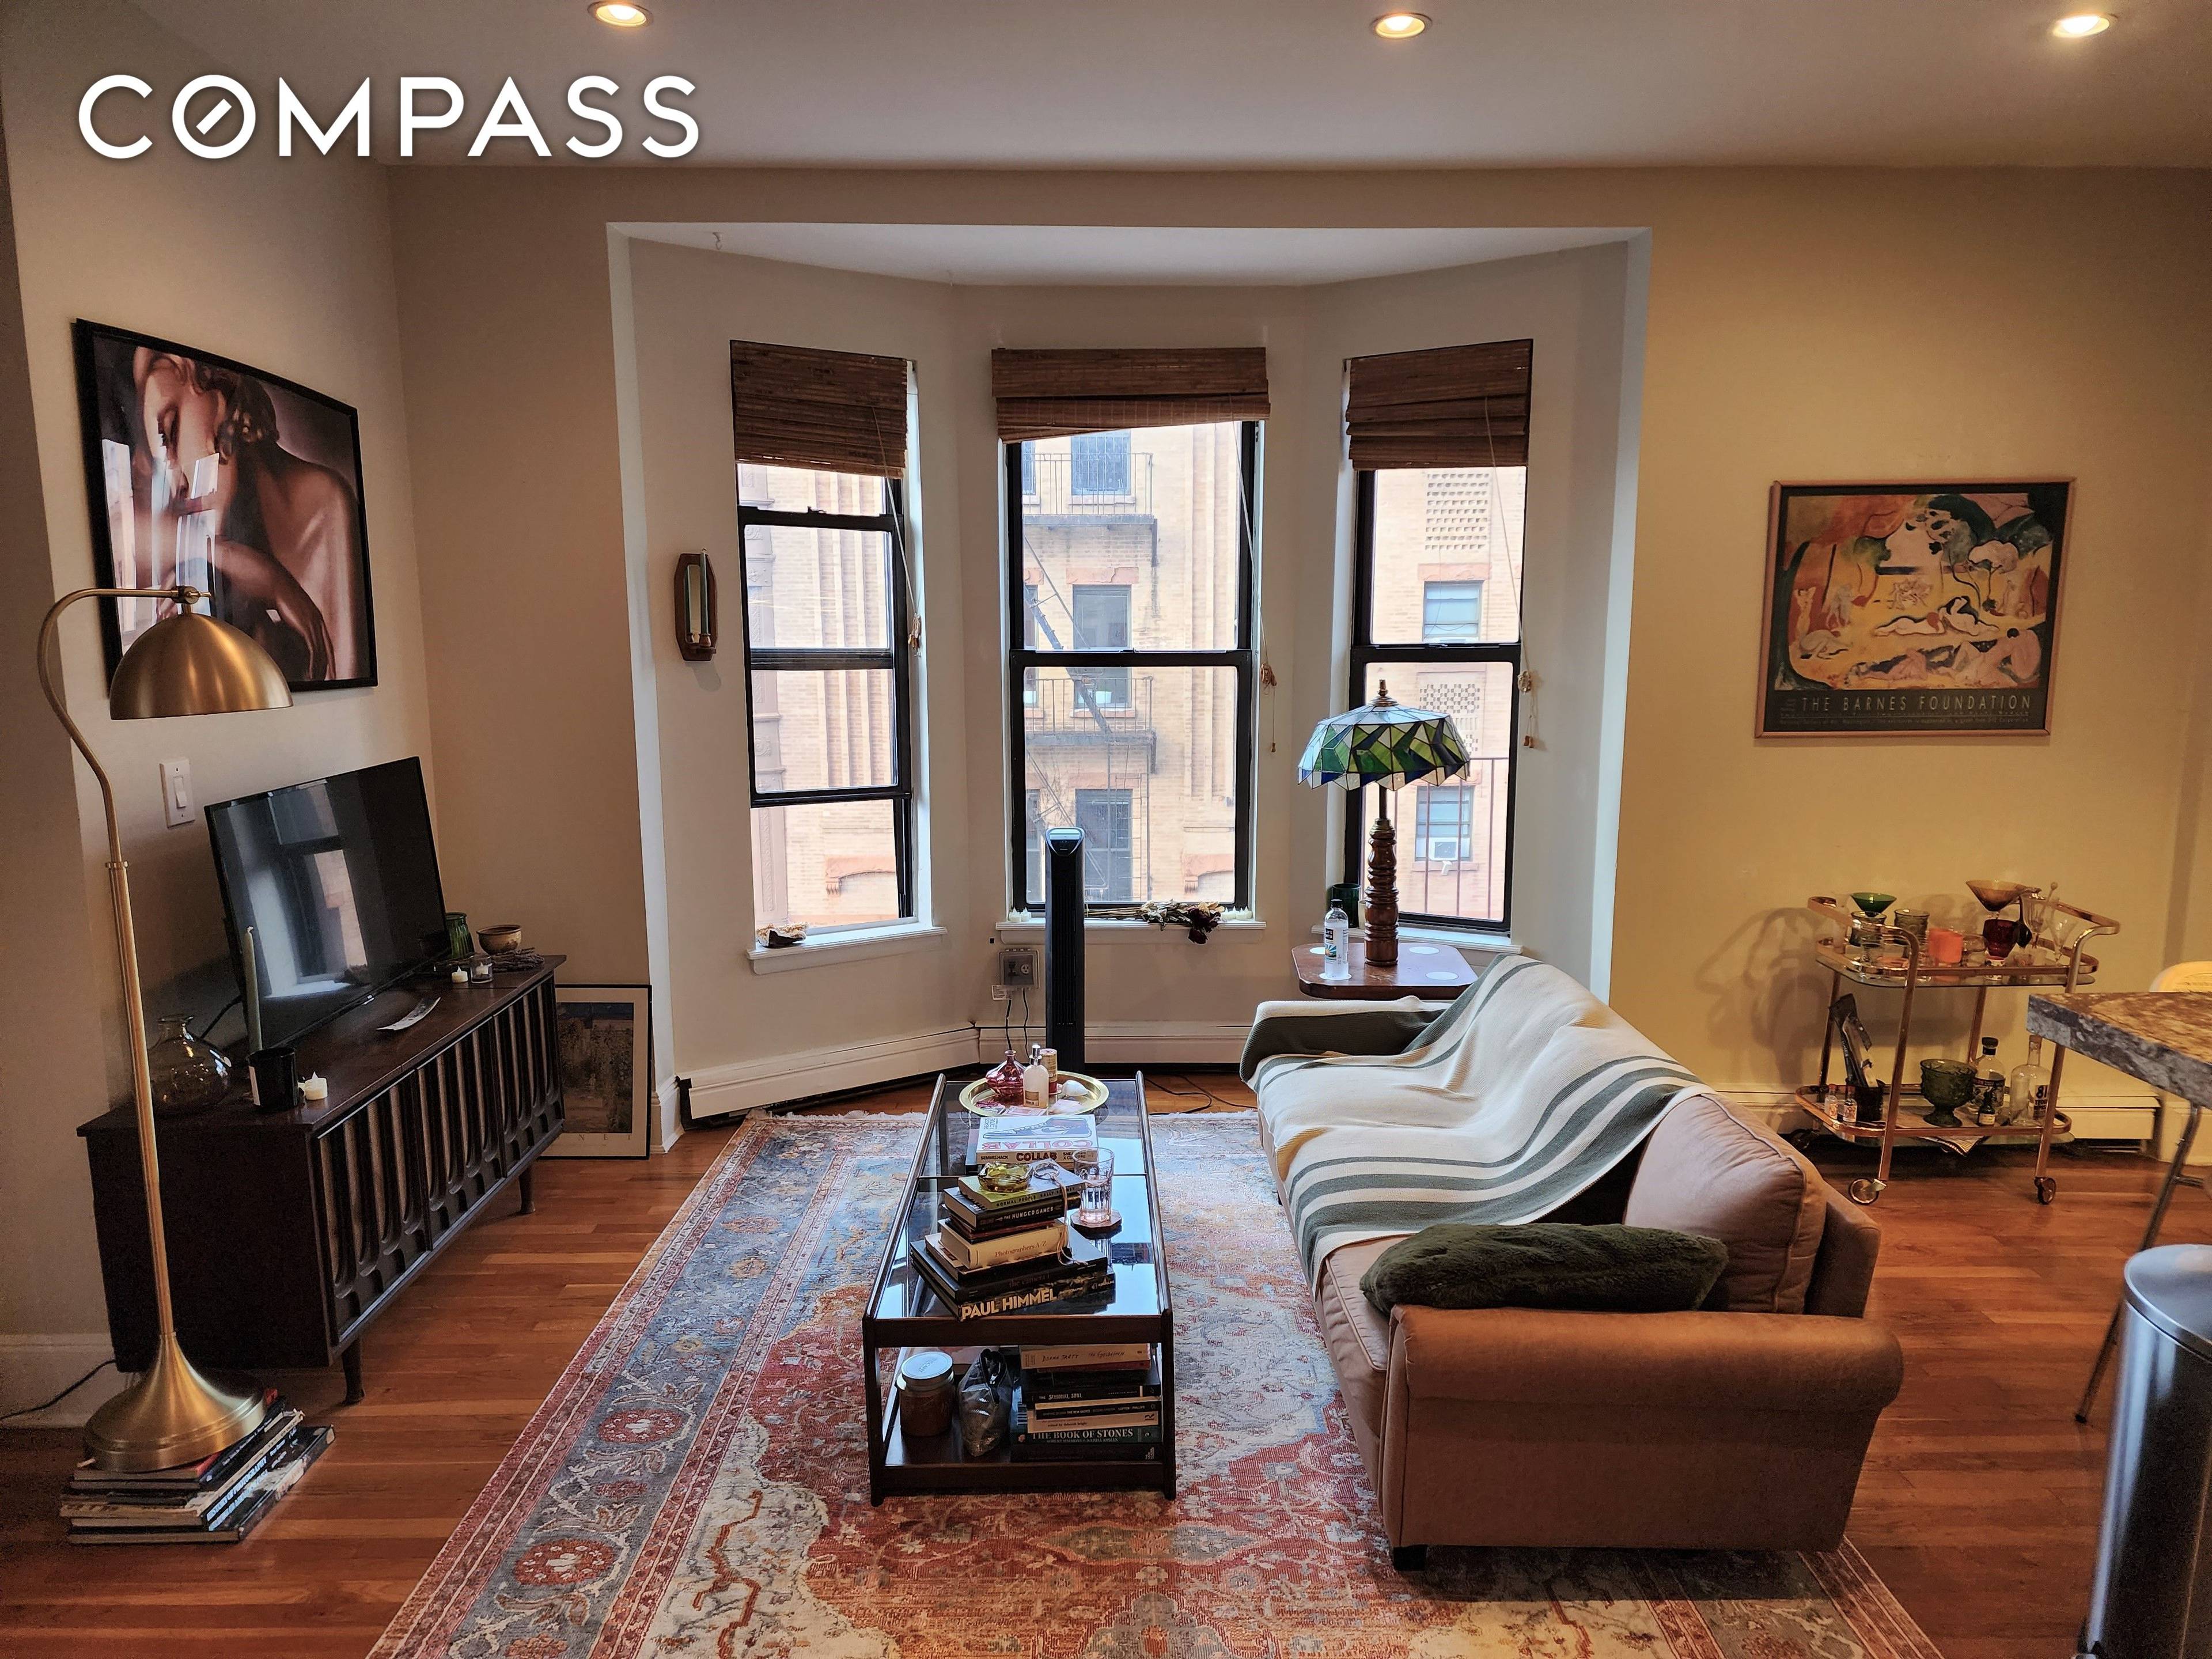 Location Location ! This sunny condo rental is ideally located on the corner of 15th Street and 7th Avenue.